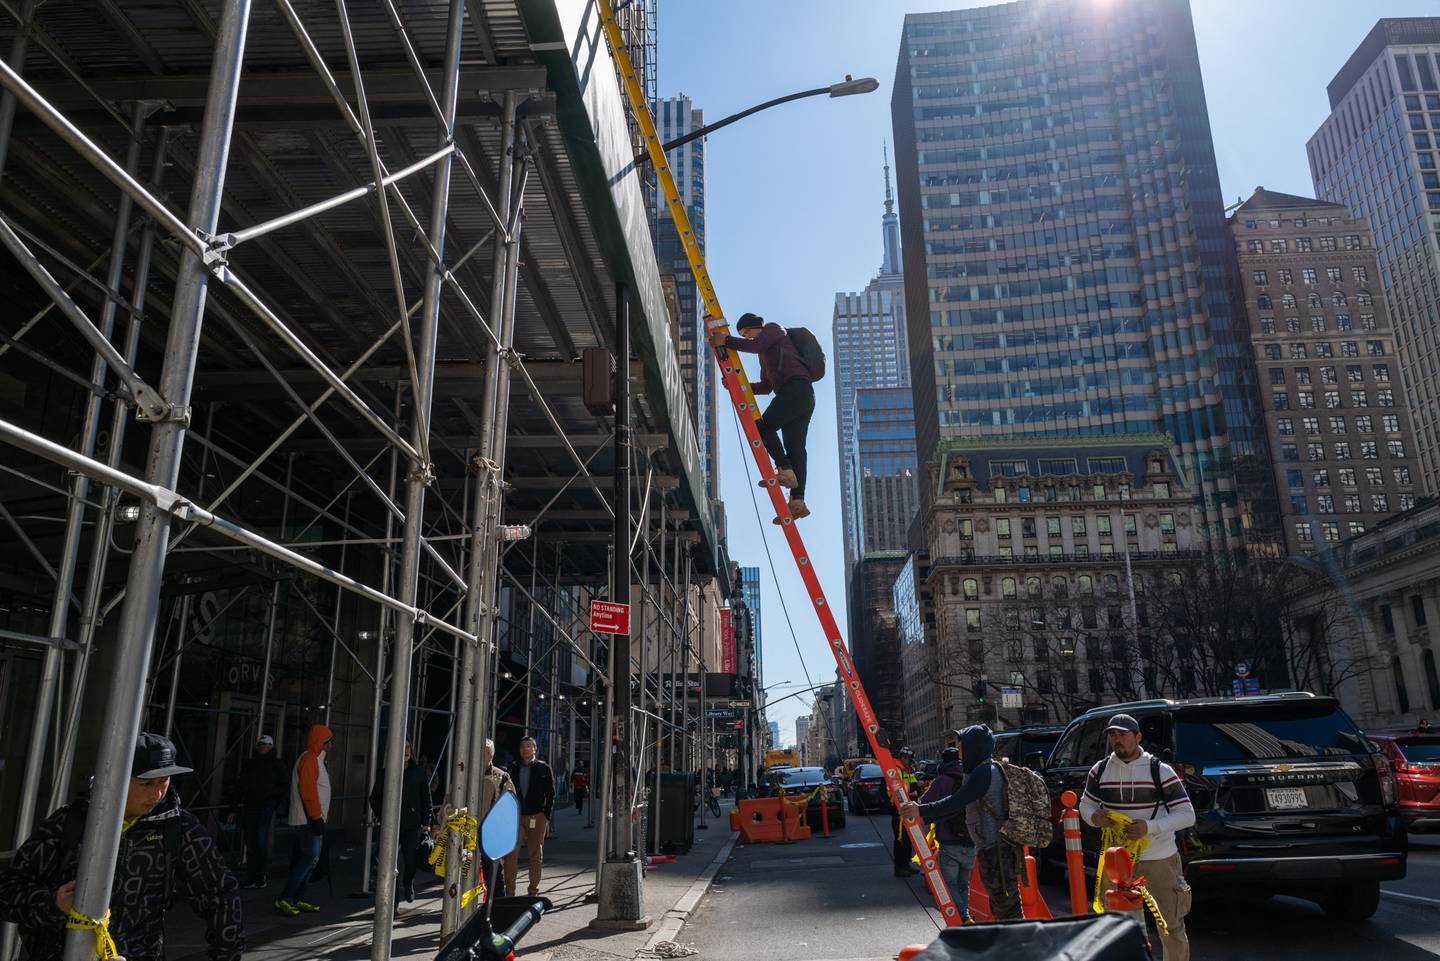 NEW YORK, NEW YORK - MARCH 30: A man walks down a construction ladder in a busy midtown Manhattan on March 30, 2023 in New York City. In a new report by the U.S. Census Bureau released today, the population of several major U.S. cities has started to show signs of growth after a decline during the coronavirus pandemic. New York County, which encompasses Manhattan, added more than 17,000 residents in the year ending last July. The county had lost more than 110,000 residents in the previous 12-month period.   Spencer Platt/Getty Images/AFP (Photo by SPENCER PLATT / GETTY IMAGES NORTH AMERICA / Getty Images via AFP)